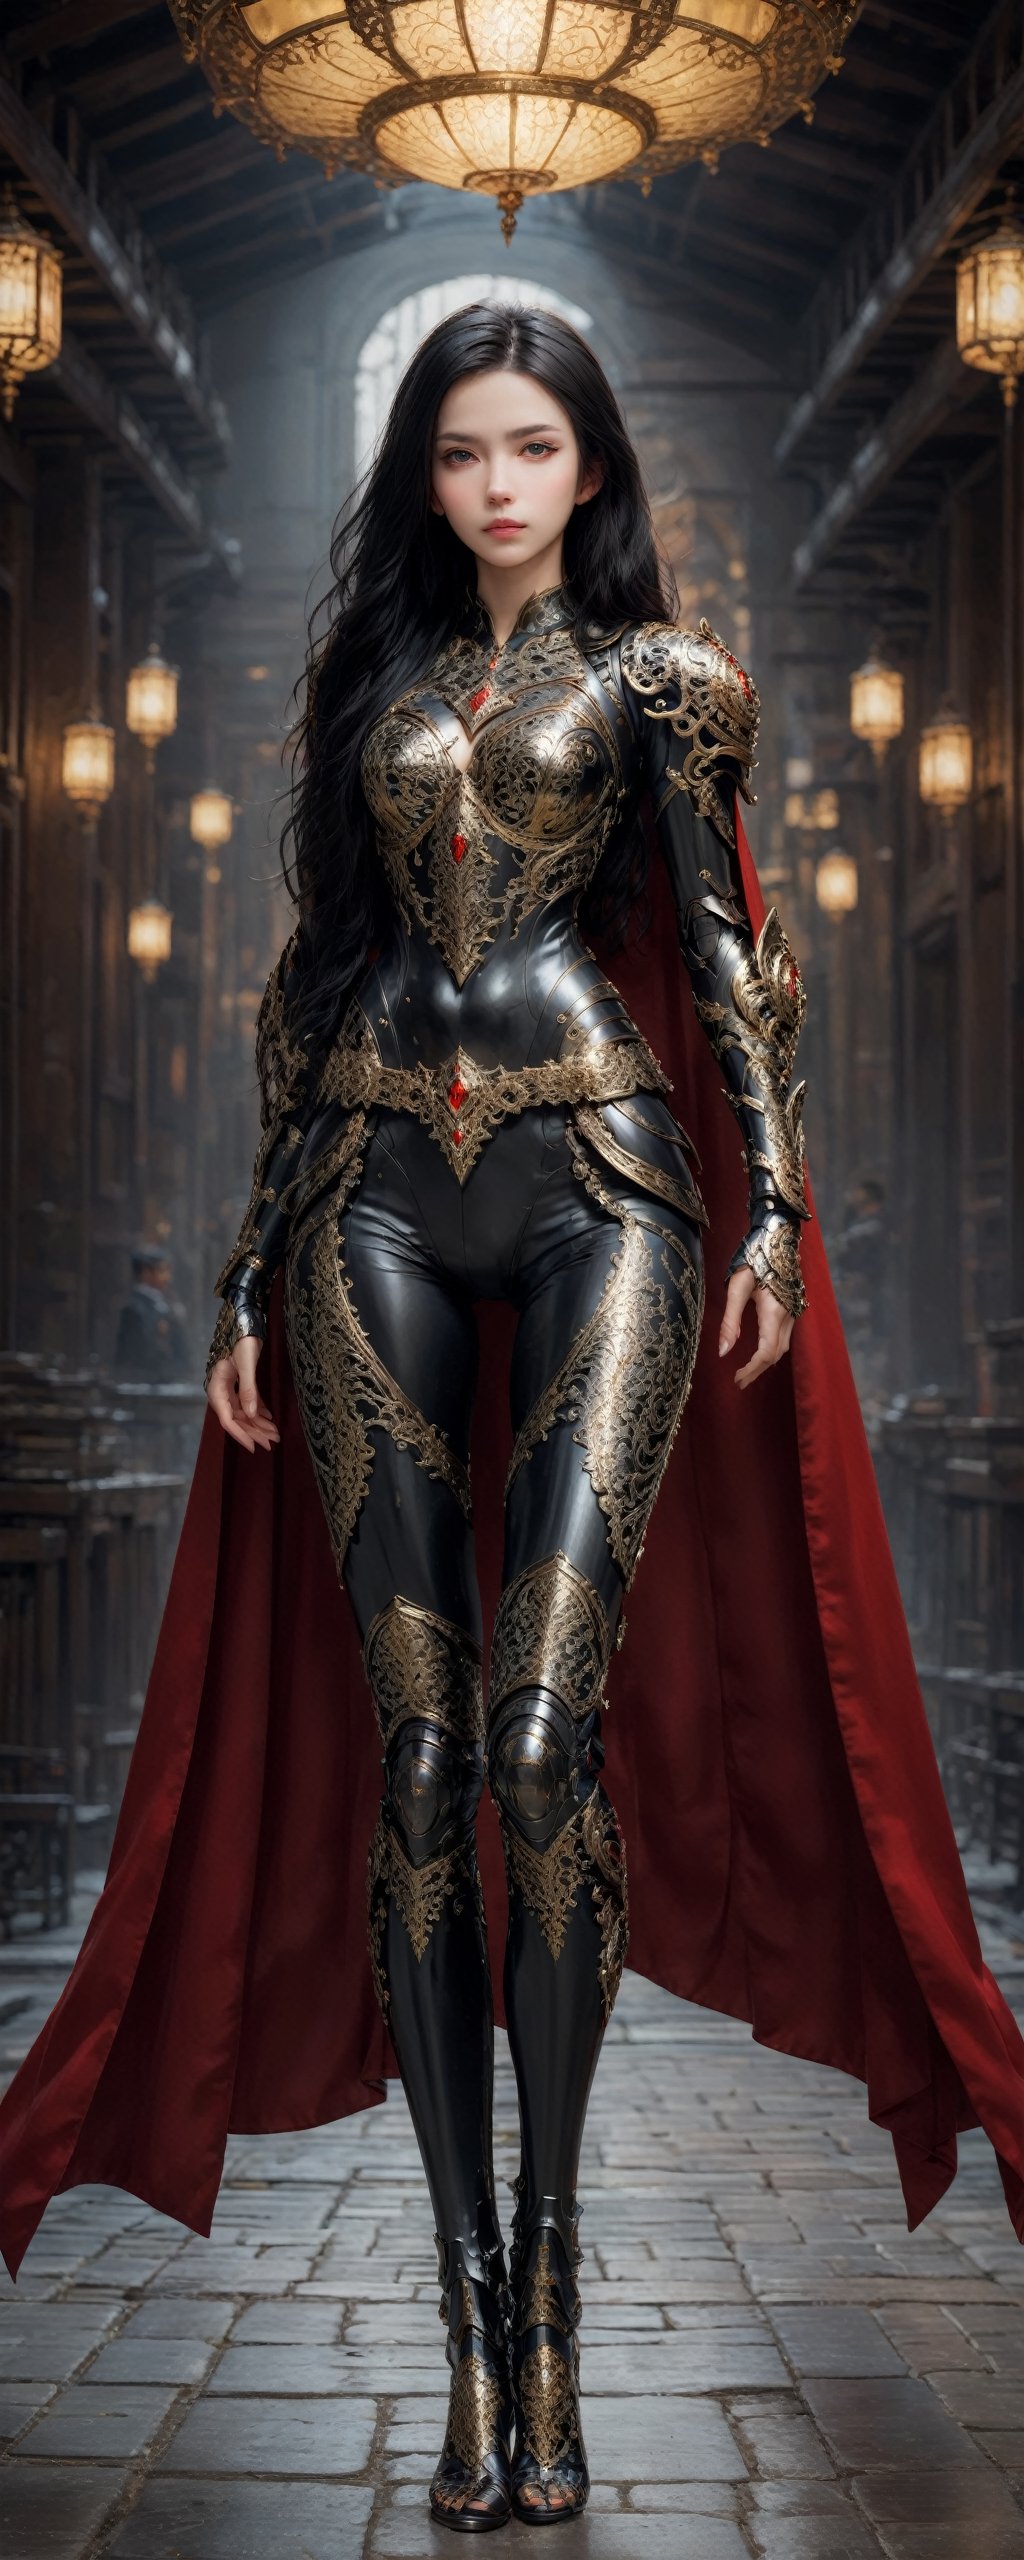 front_view, masterpiece, best quality, photorealistic, raw photo, (1girl, looking at viewer), black long hair, mechanical black armor, intricate armor, delicate gold filigree, black metalic parts, detailed part, red cape, standing pose, detailed background, dynamic lighting,Long Legs and Hot Body,Wonder of Beauty,Enhanced All